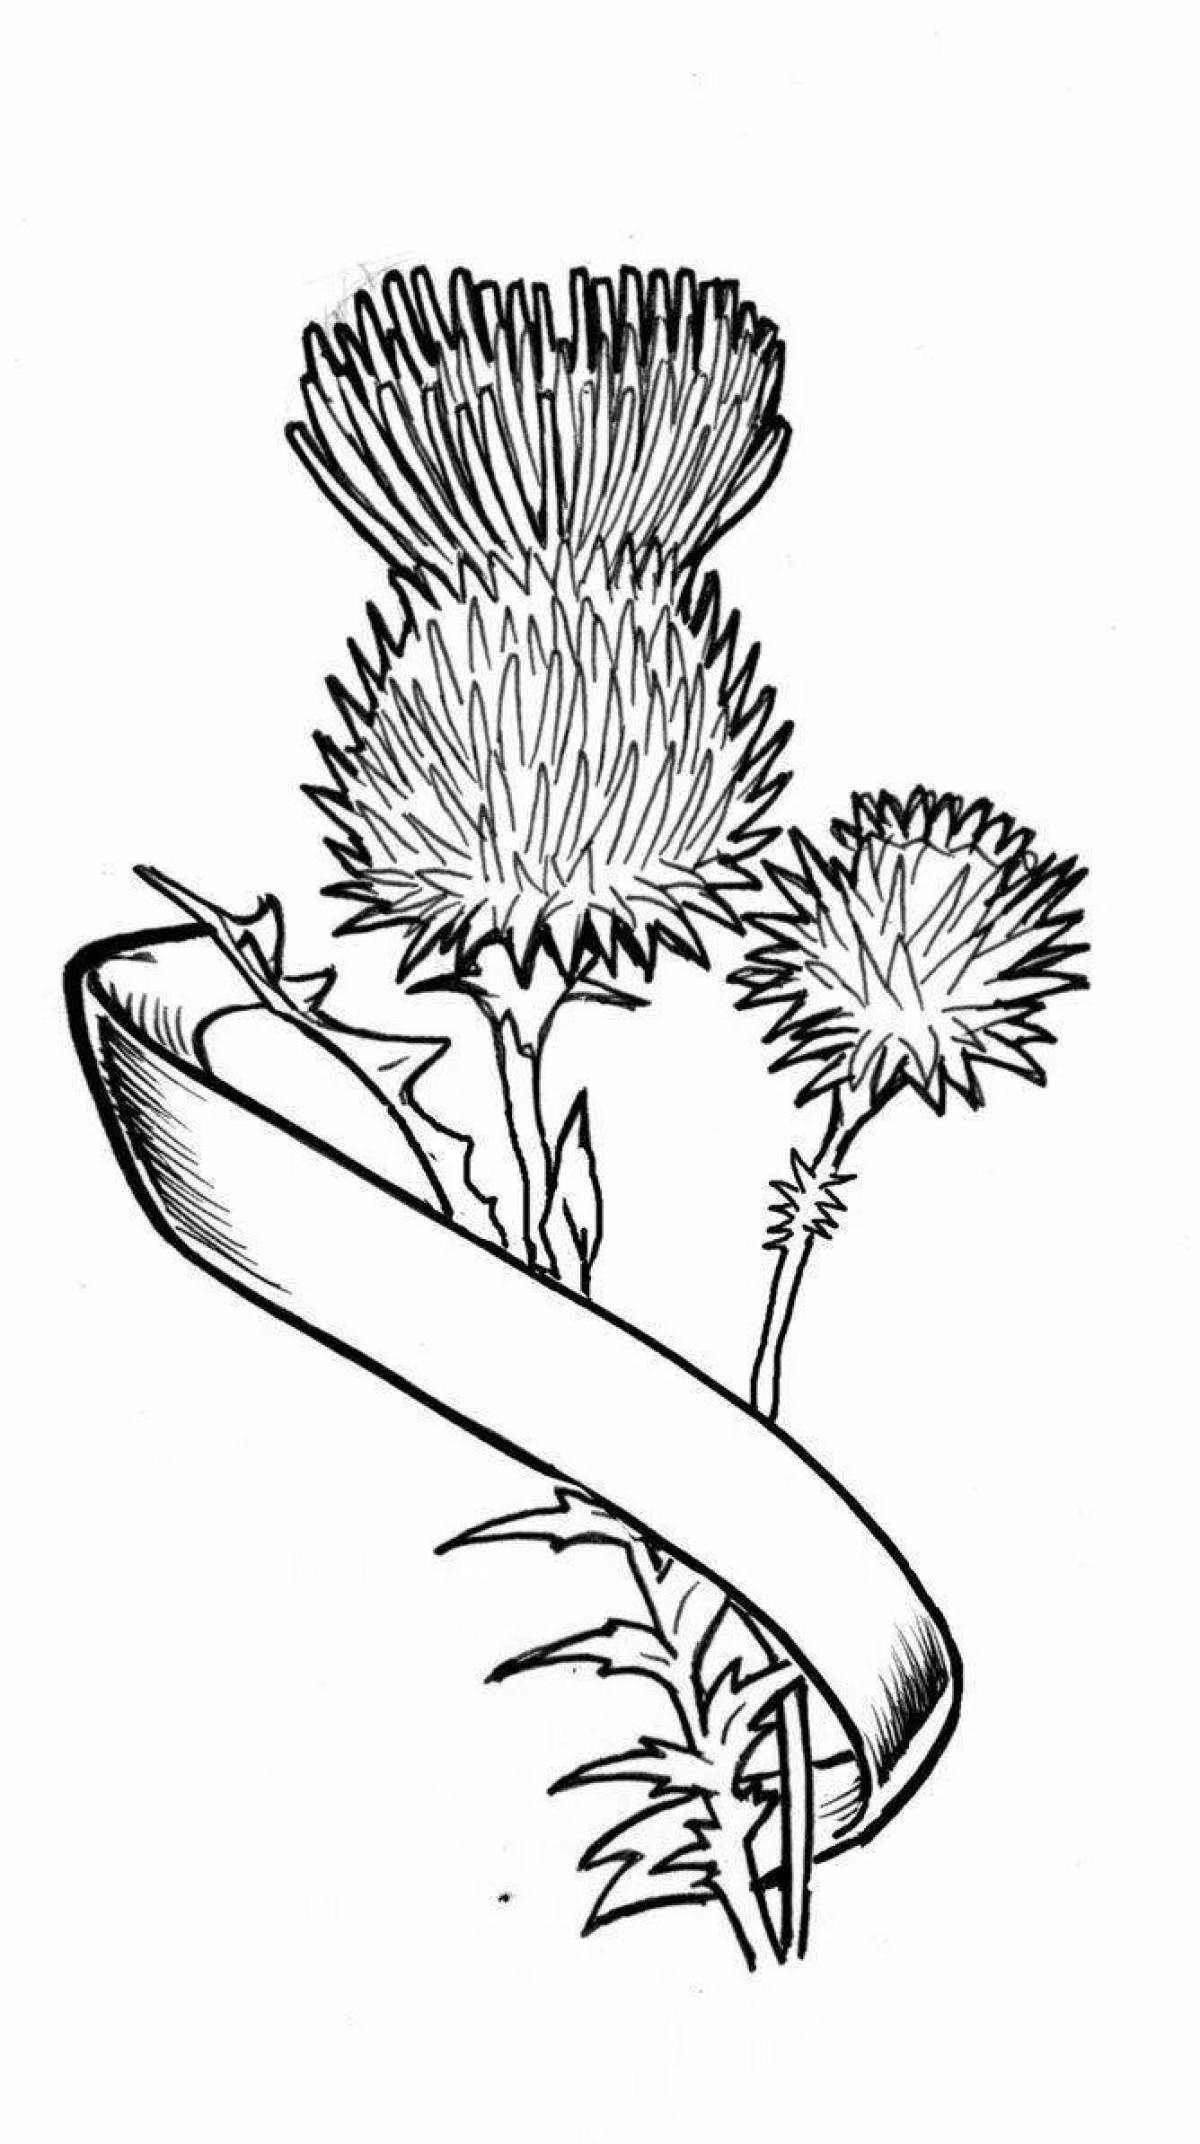 Coloring book cheerful thistle